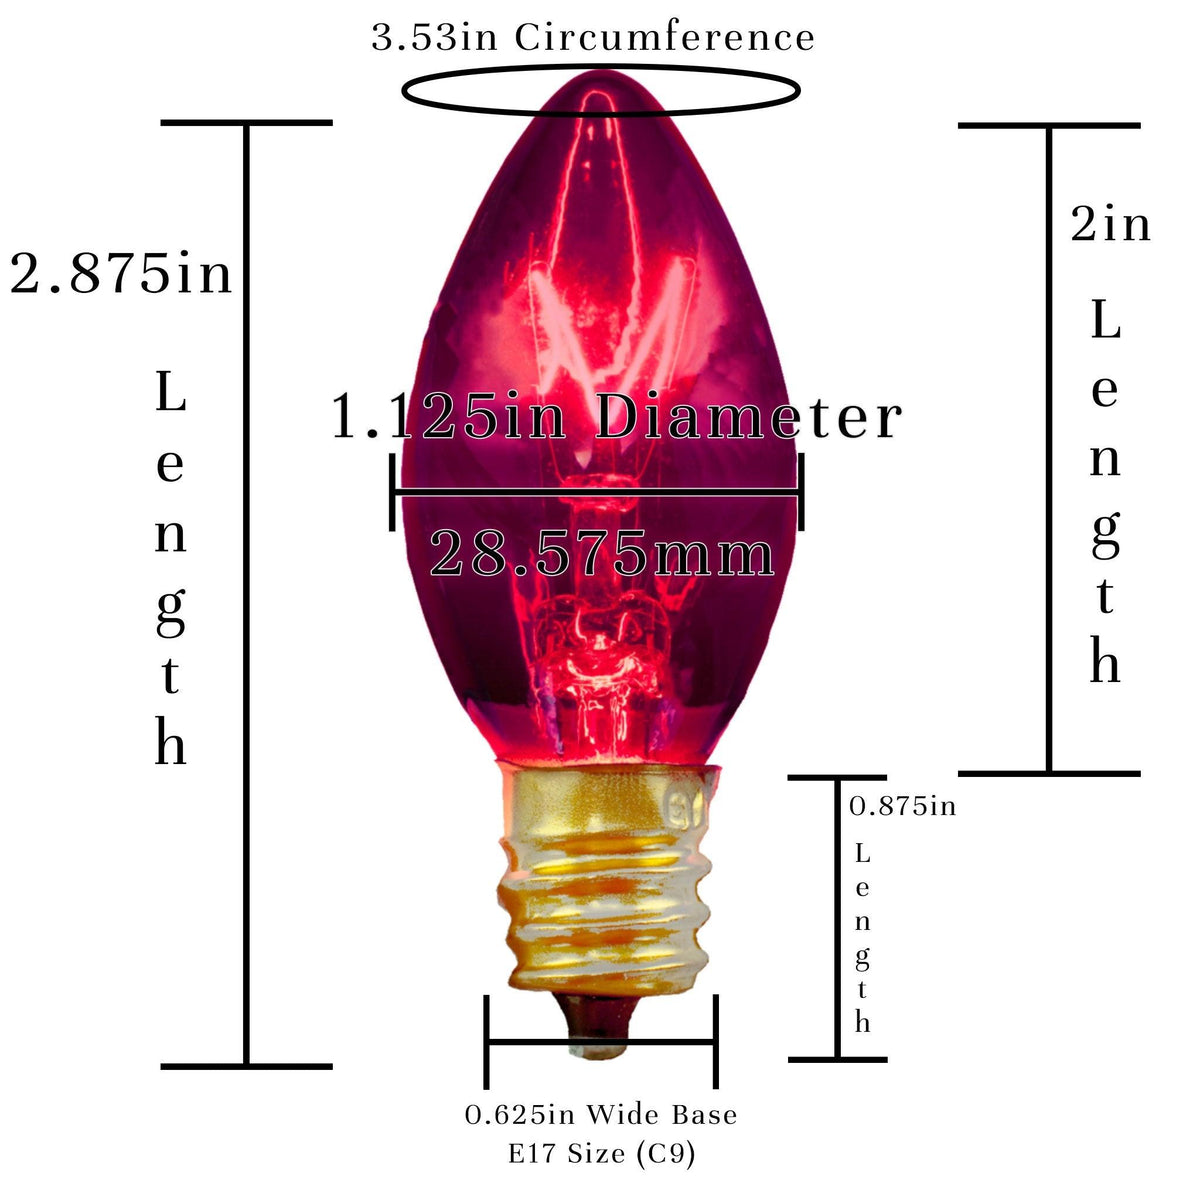 Size of a C9 Light Bulb in purple color.